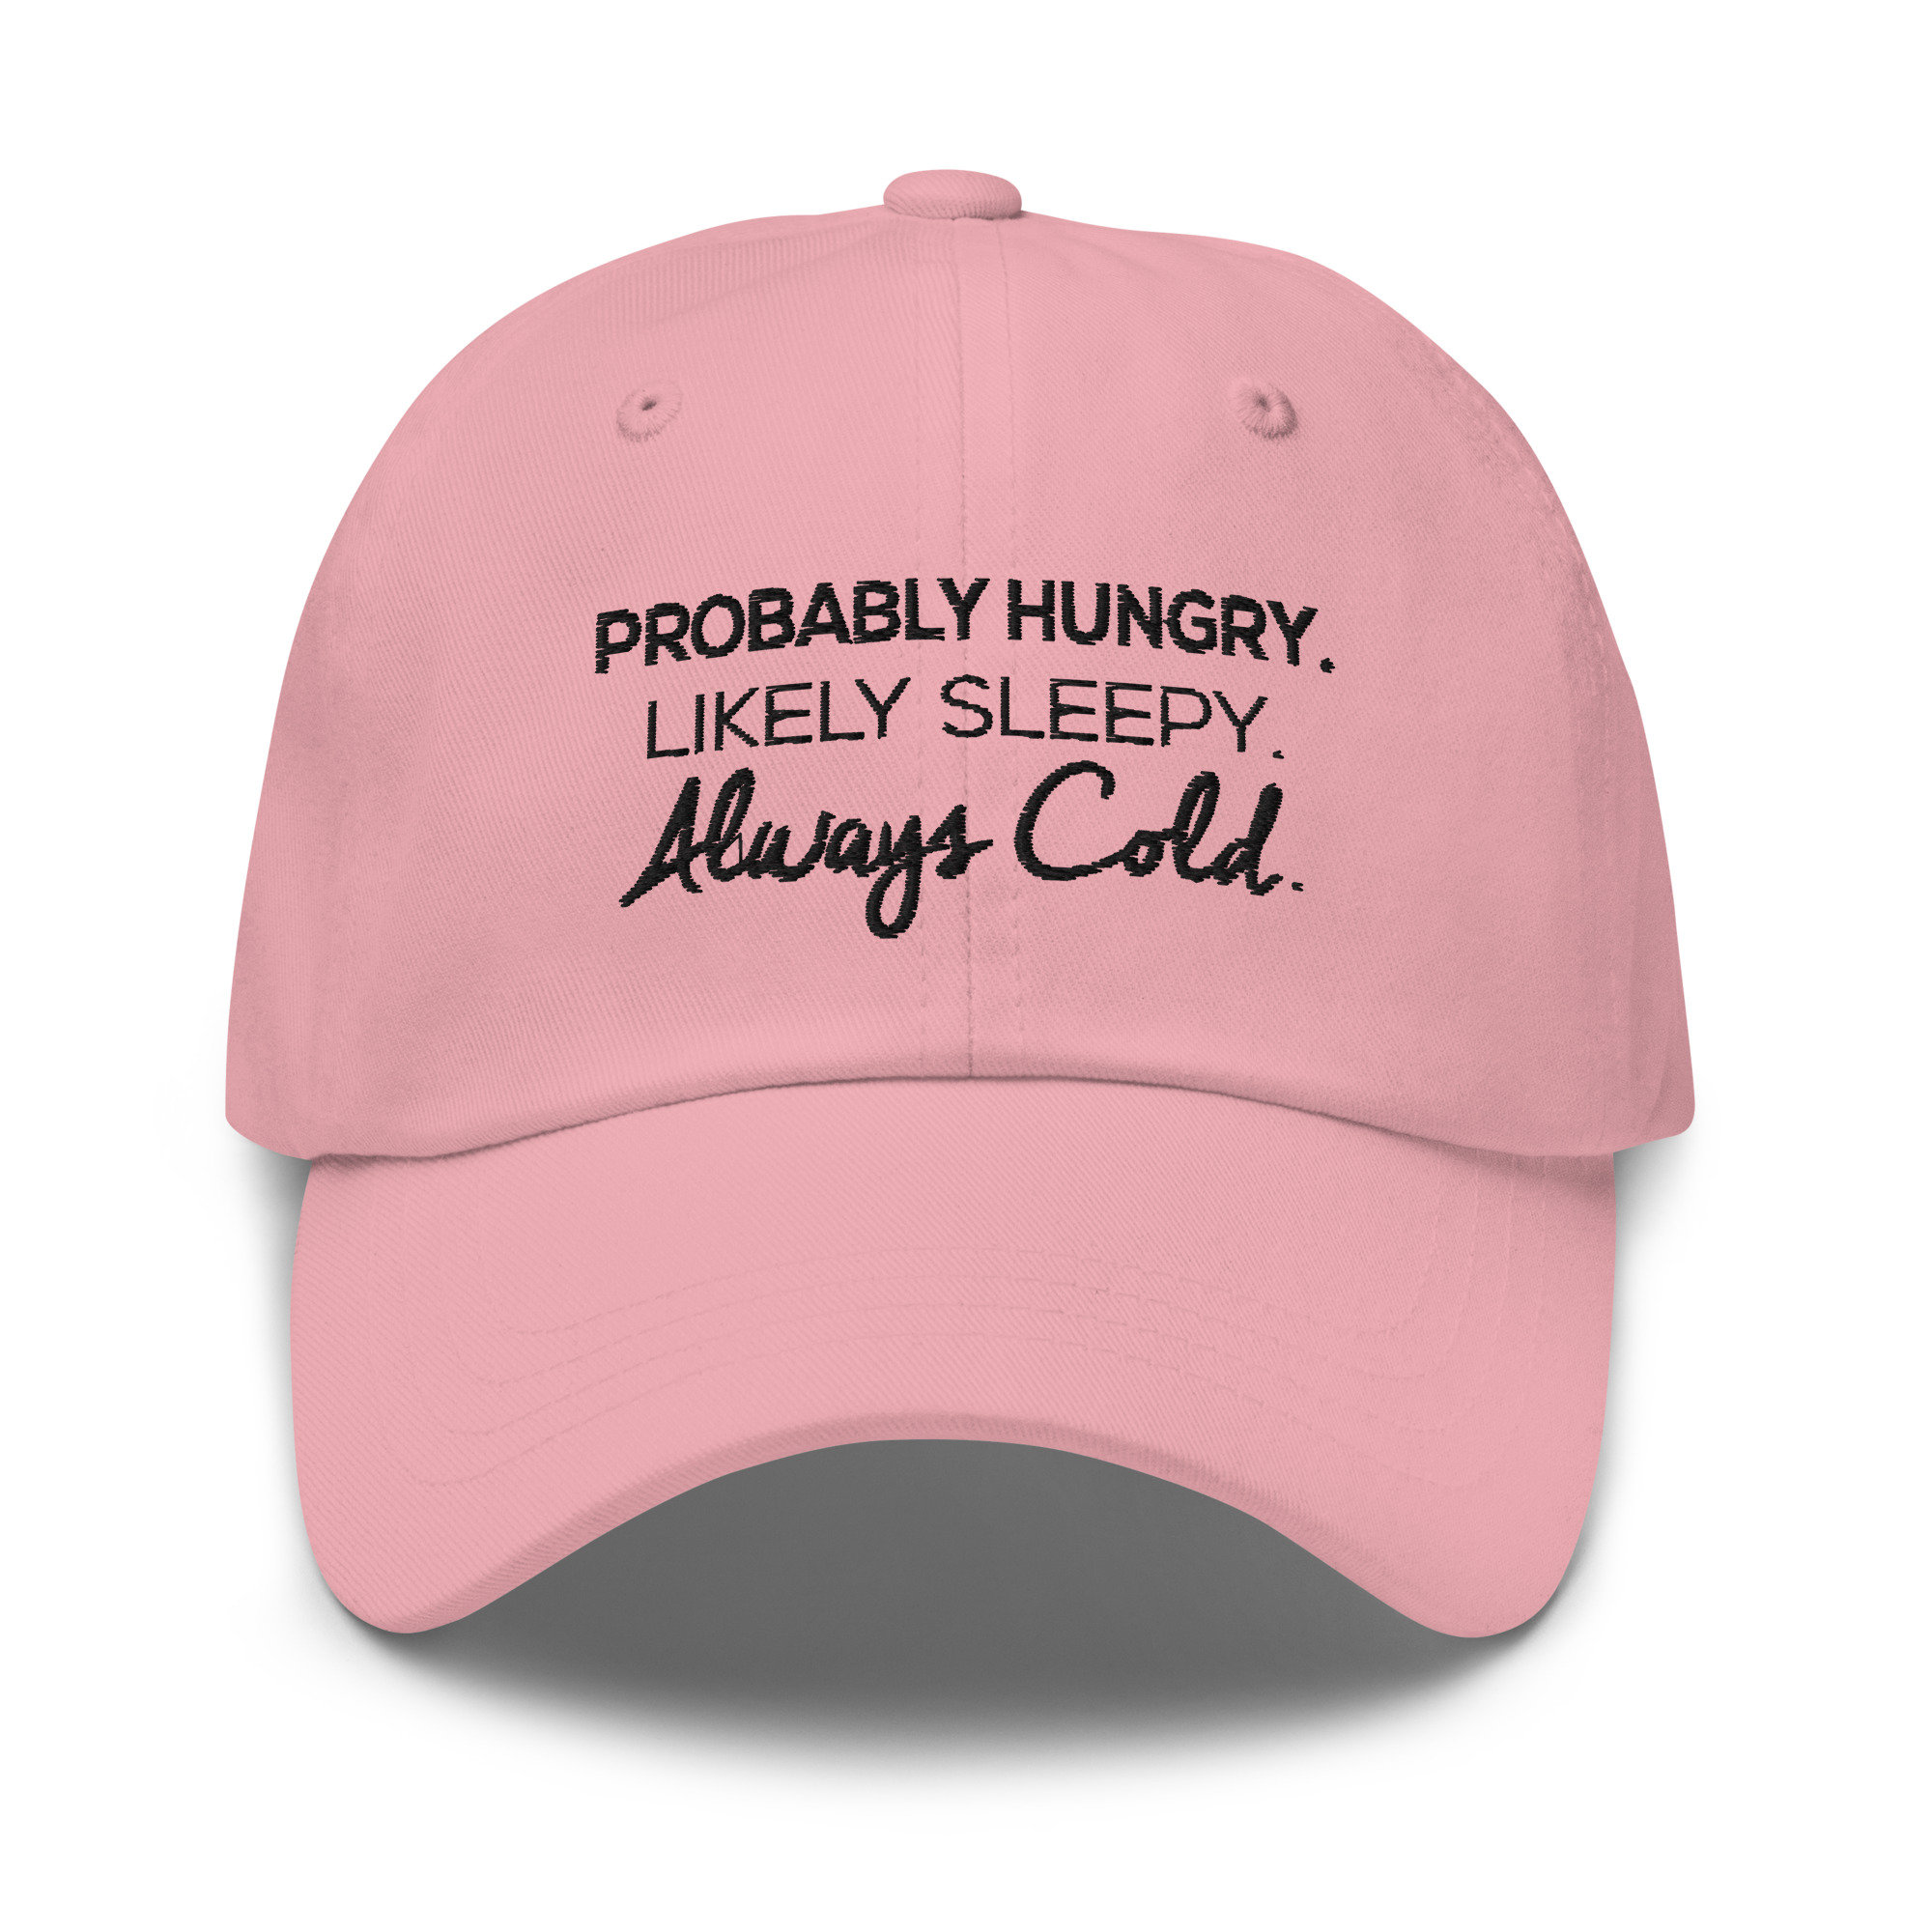 Probably Hungry Likely Sleepy Always Cold Funny Baseball Hat for